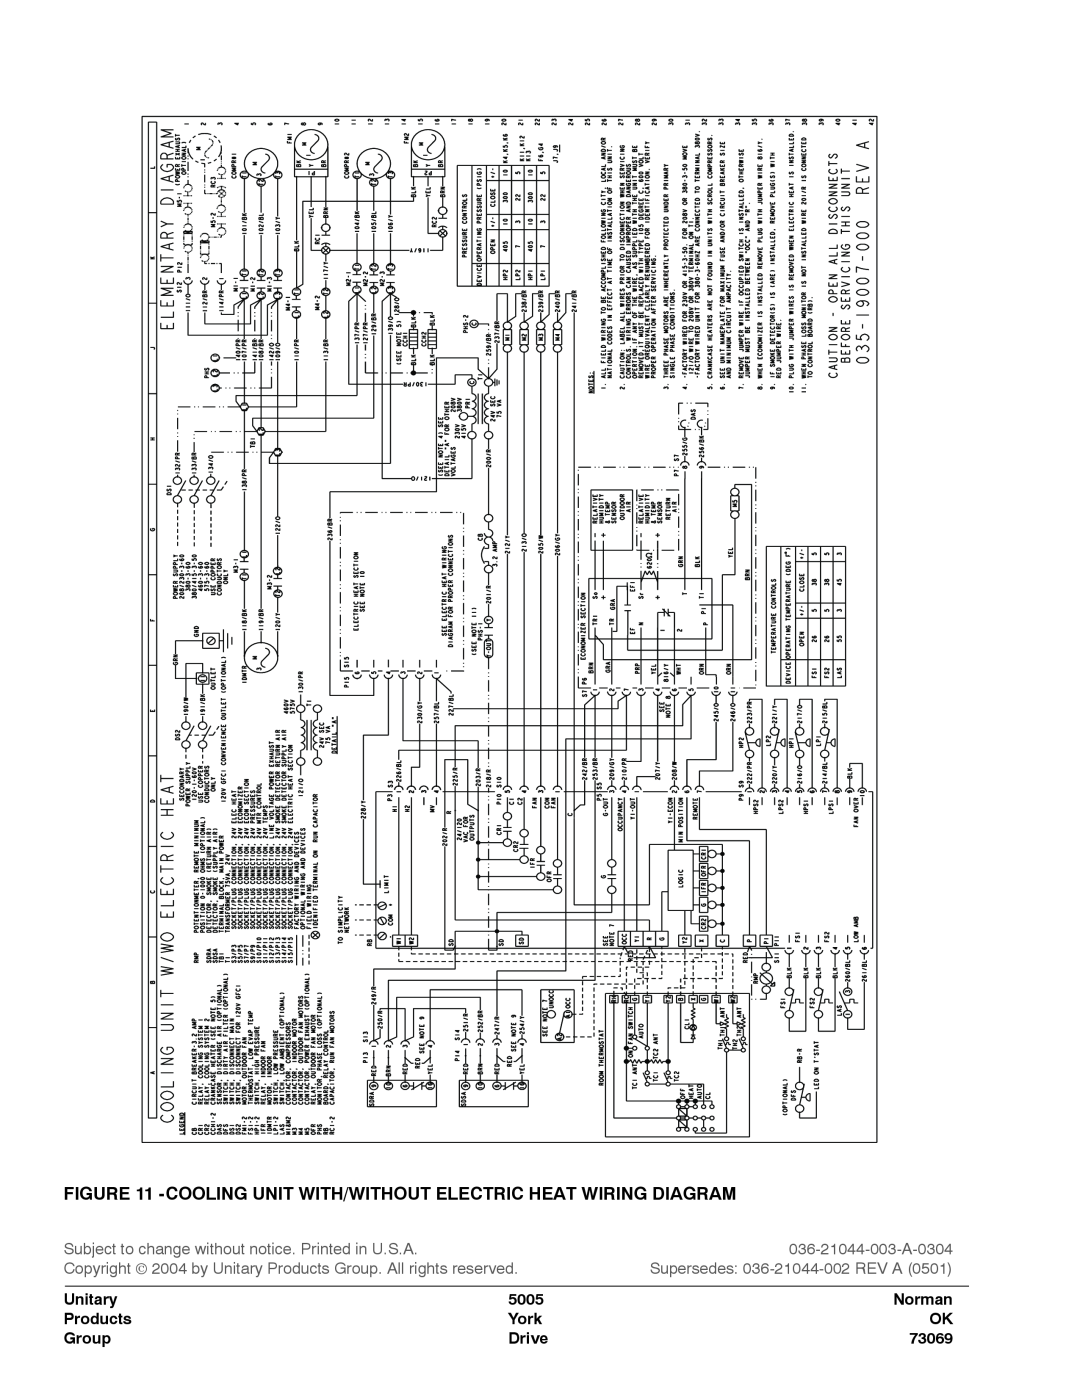 York DM150 Cooling Unit With/Without Electric Heat Wiring Diagram, 036-21044-003-A-0304, Supersedes 036-21044-002 REV A 